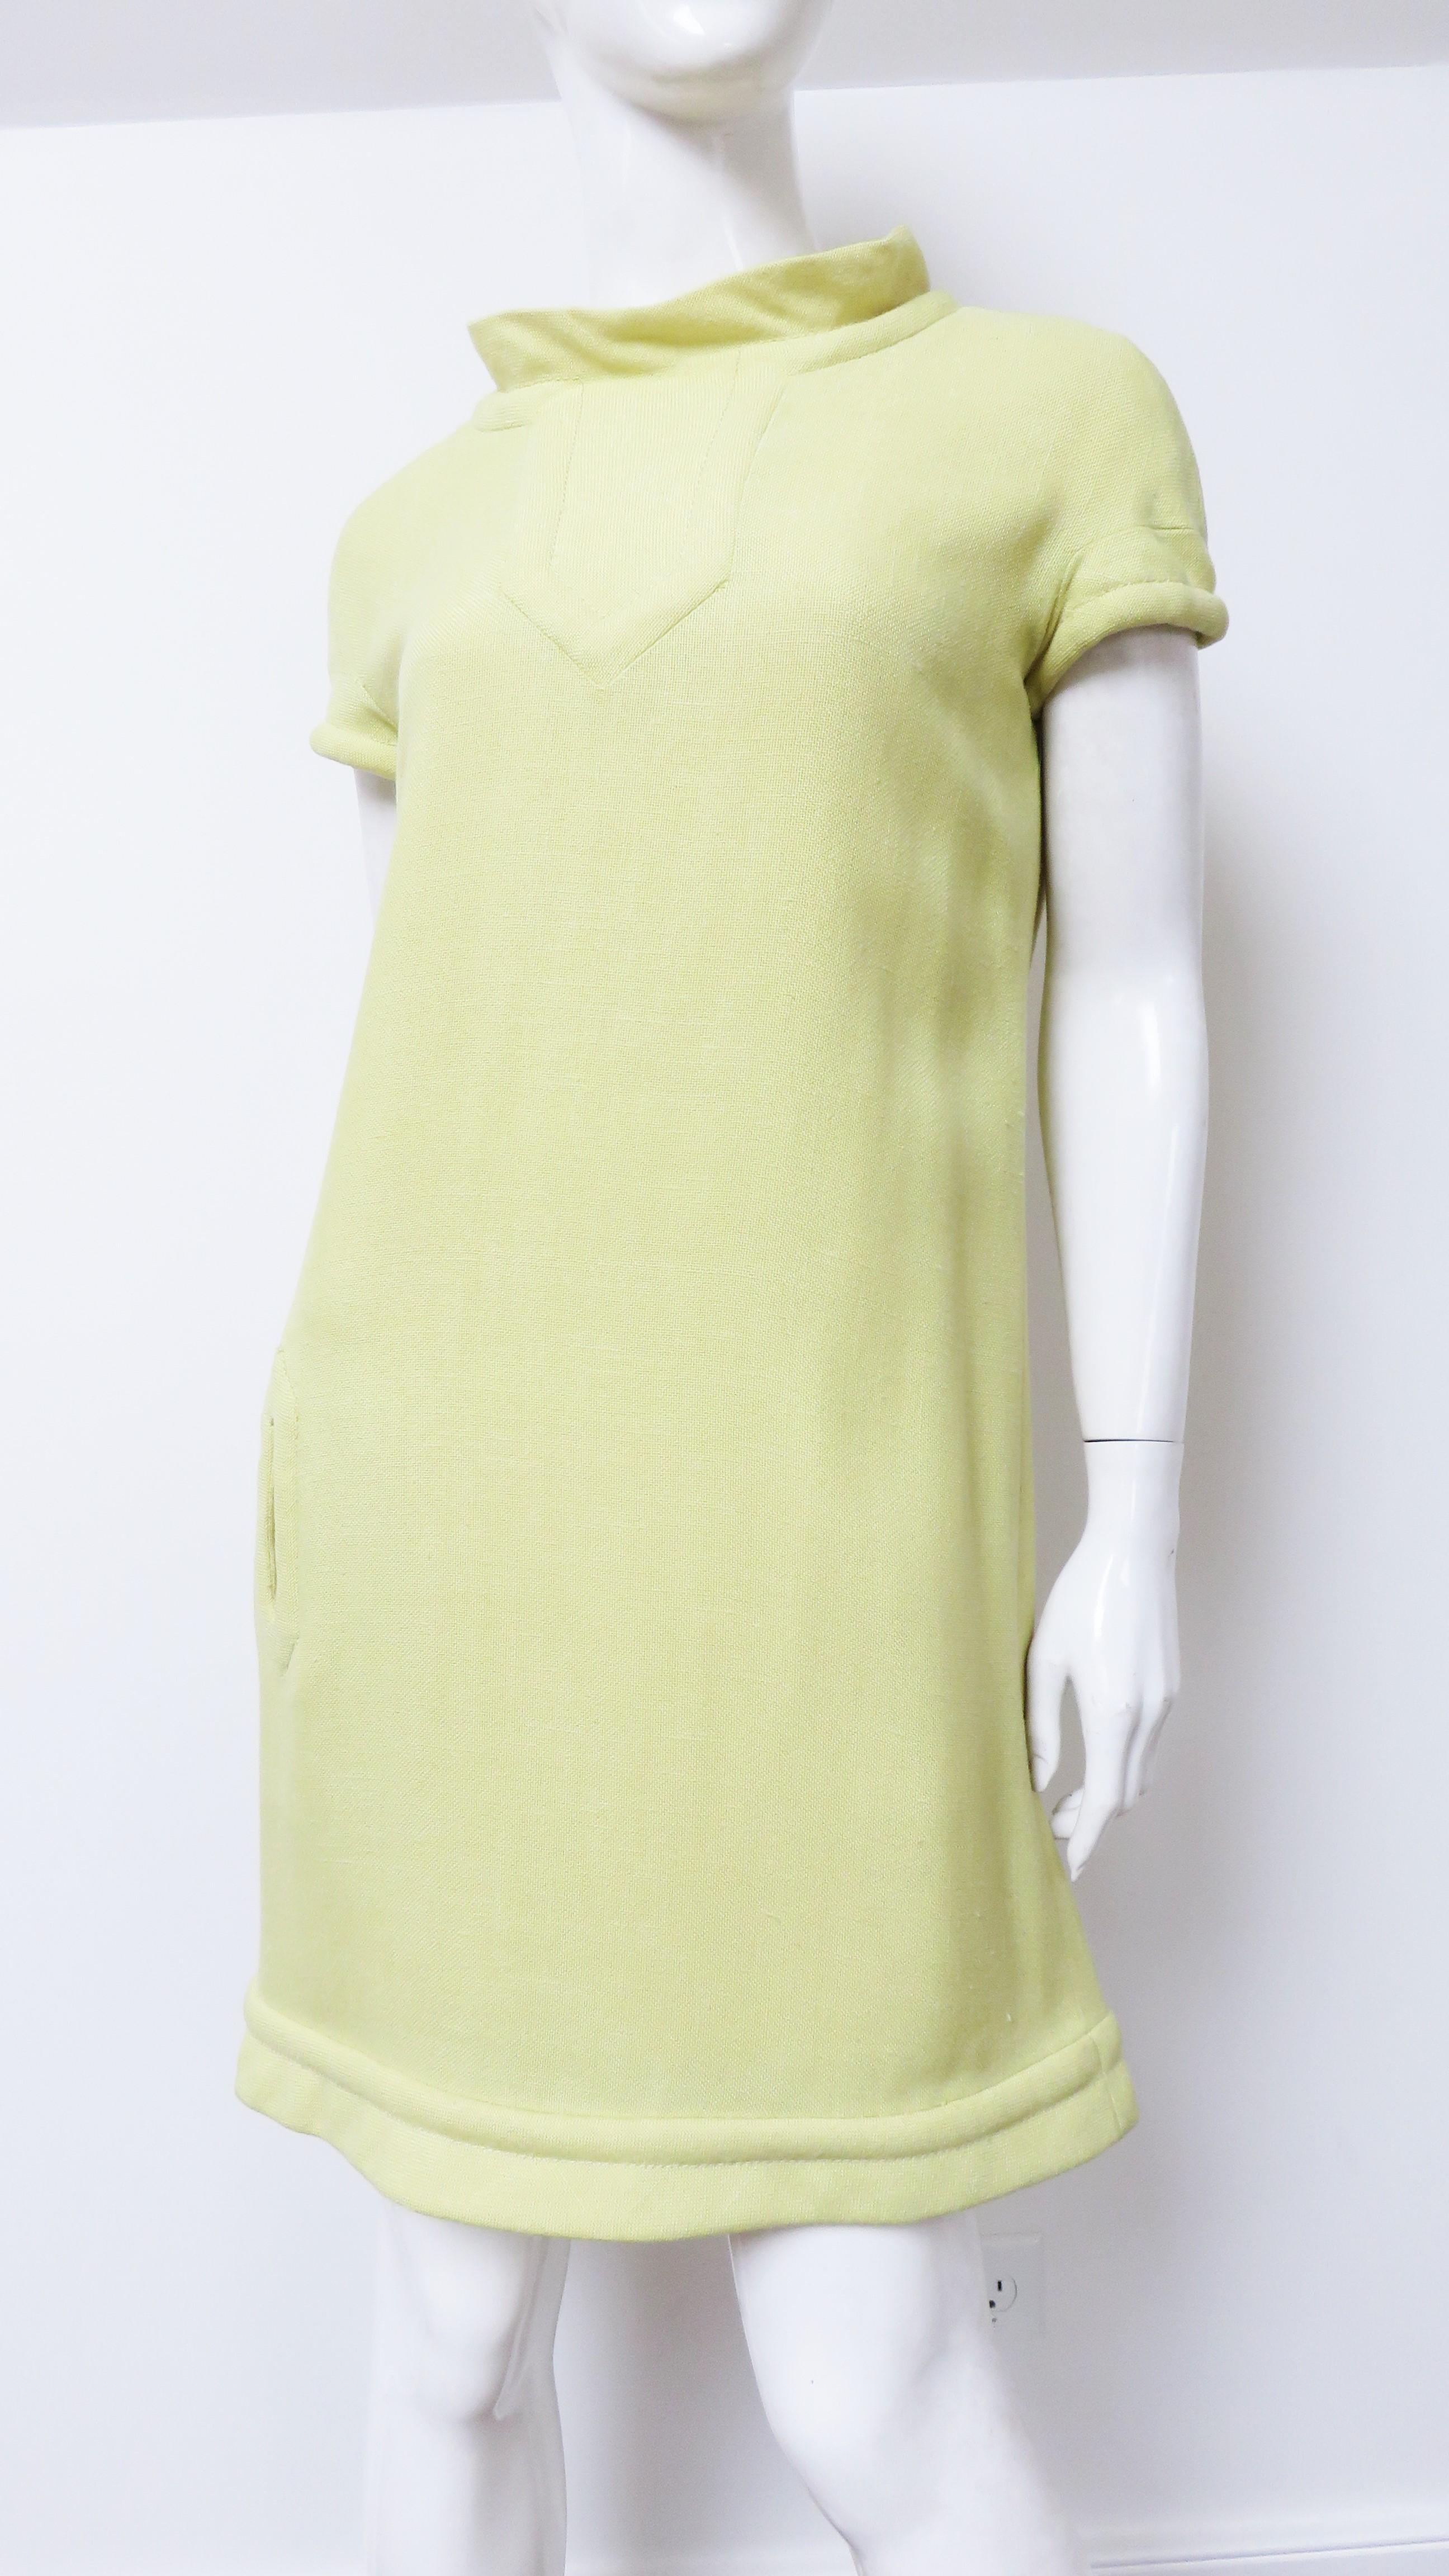 Pierre Cardin Iconic 1960s Dress In Good Condition For Sale In Water Mill, NY